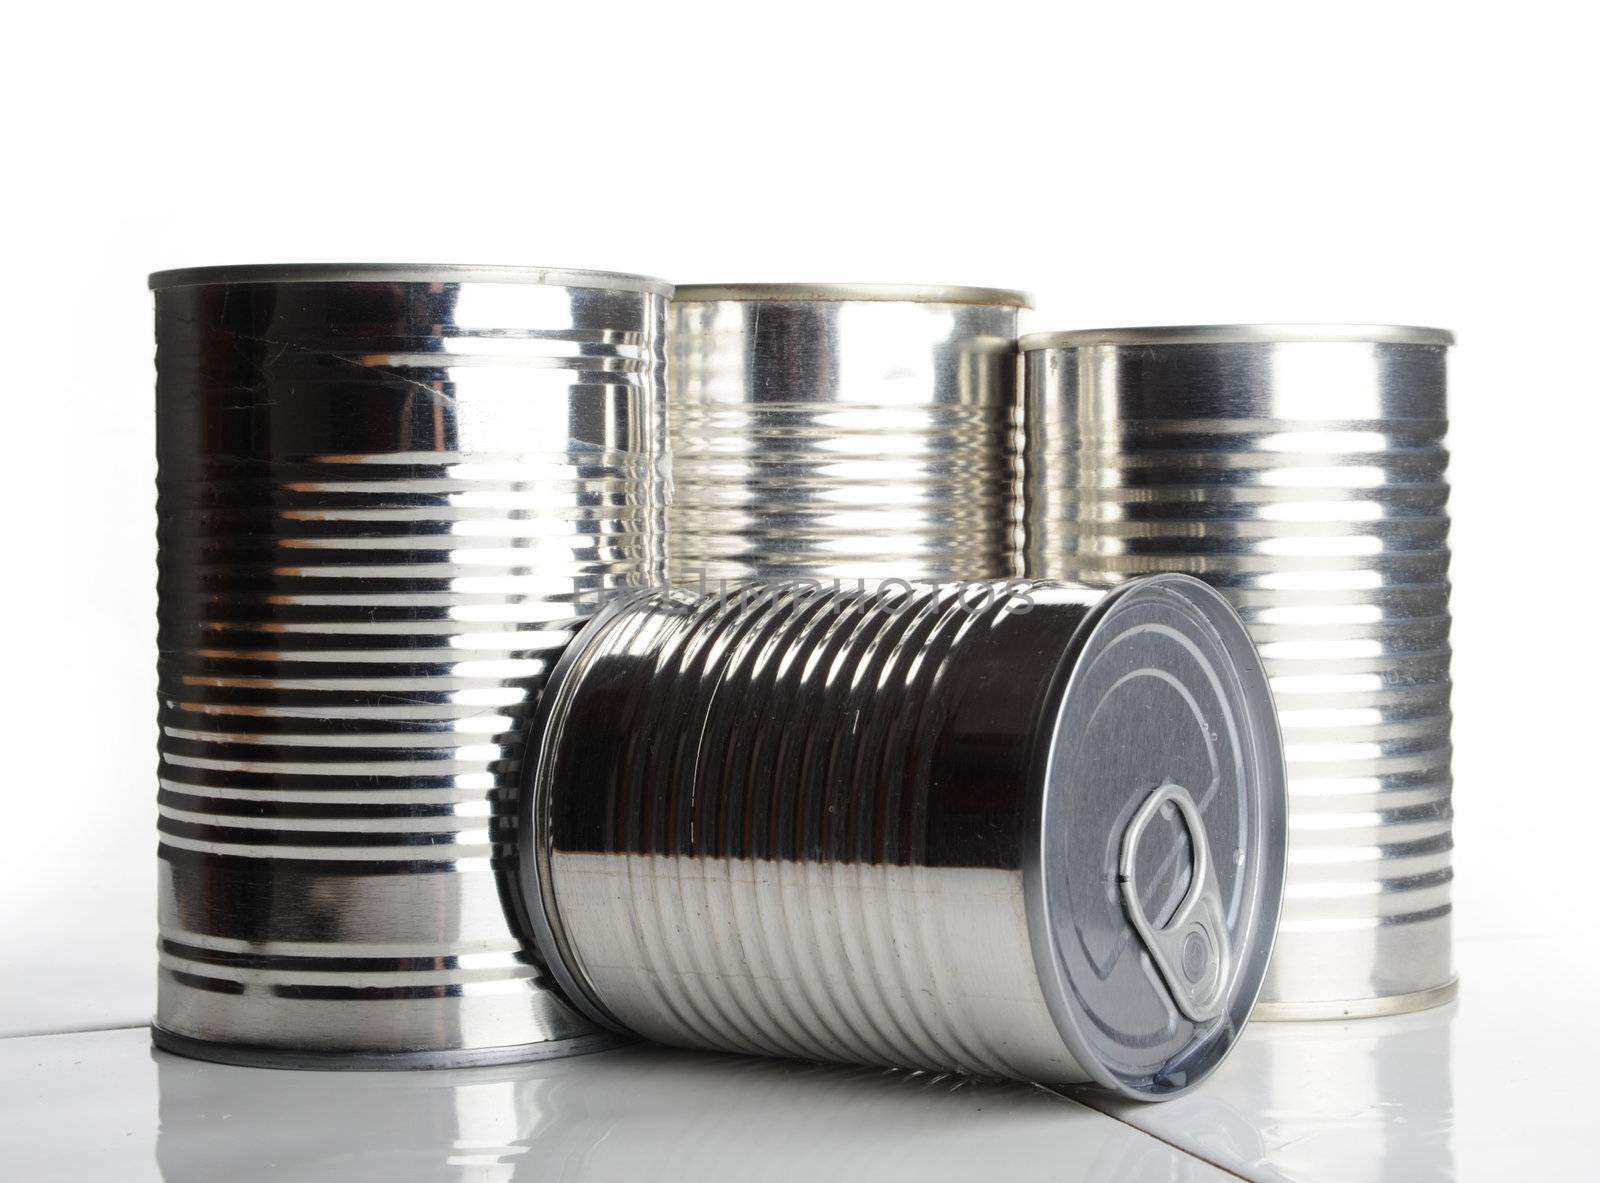 four silver food cans, one can on it's side show the ring pull on the lid